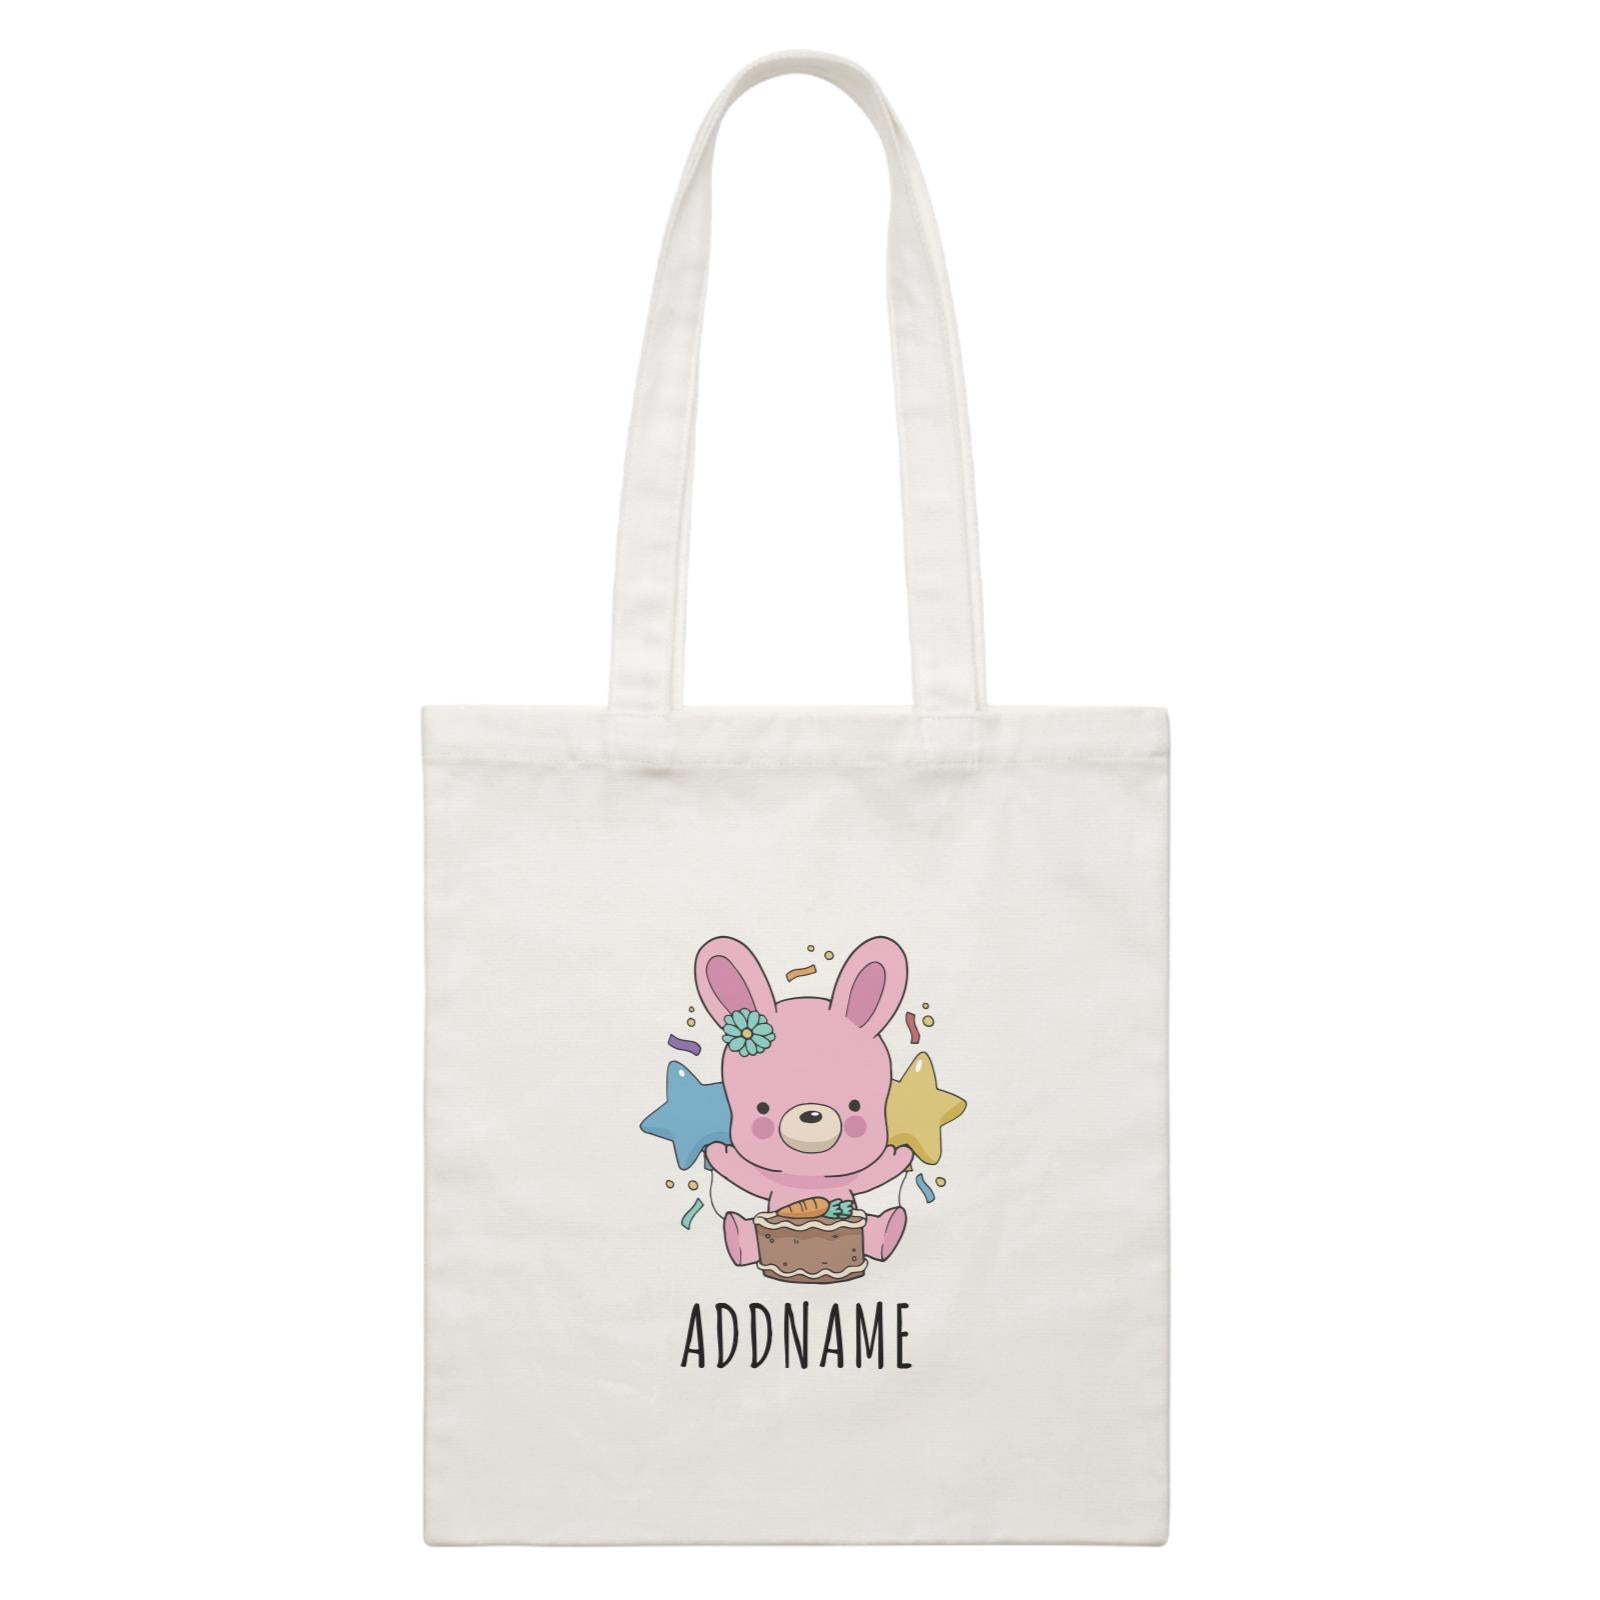 Birthday Sketch Animals Rabbit with Carrot Cake Addname White Canvas Bag